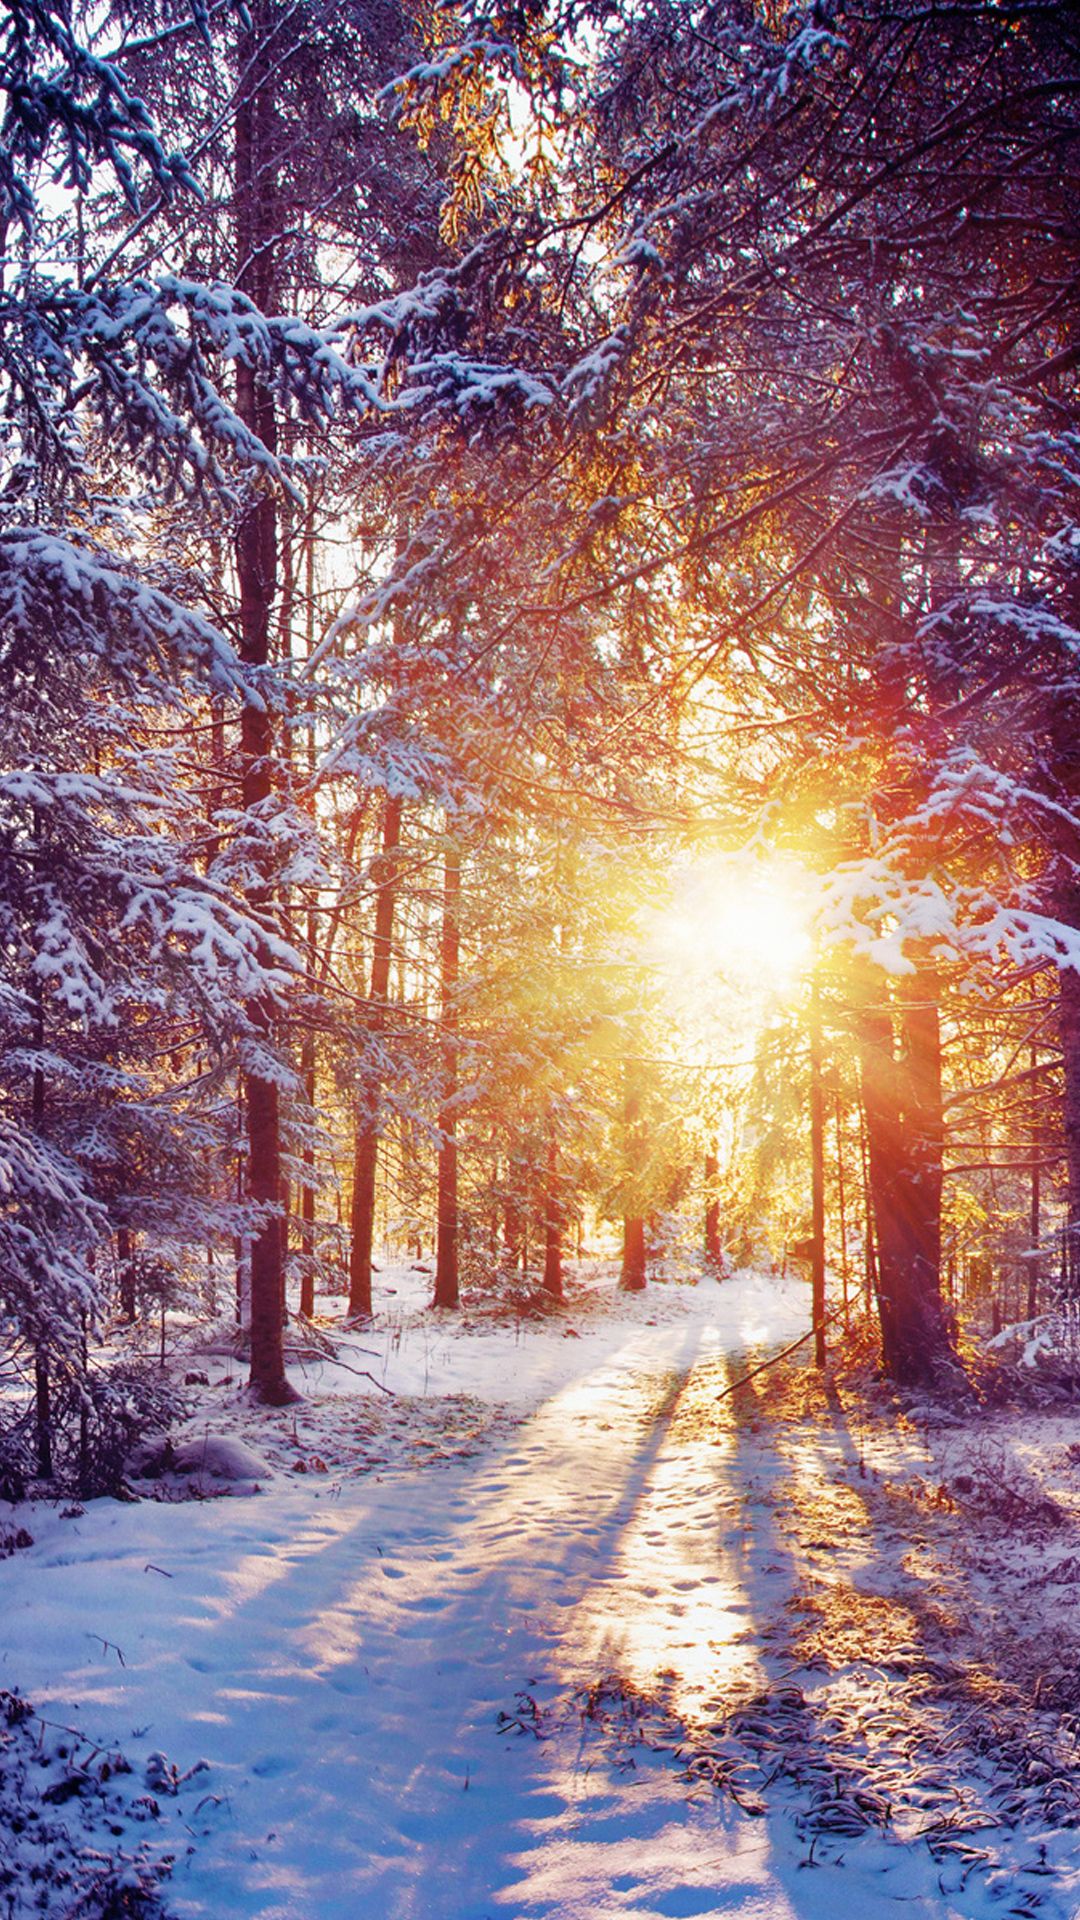 Winter Sunset Shining Through Forest Trees Iphone 6 - Winter Landscape Wallpaper Iphone , HD Wallpaper & Backgrounds